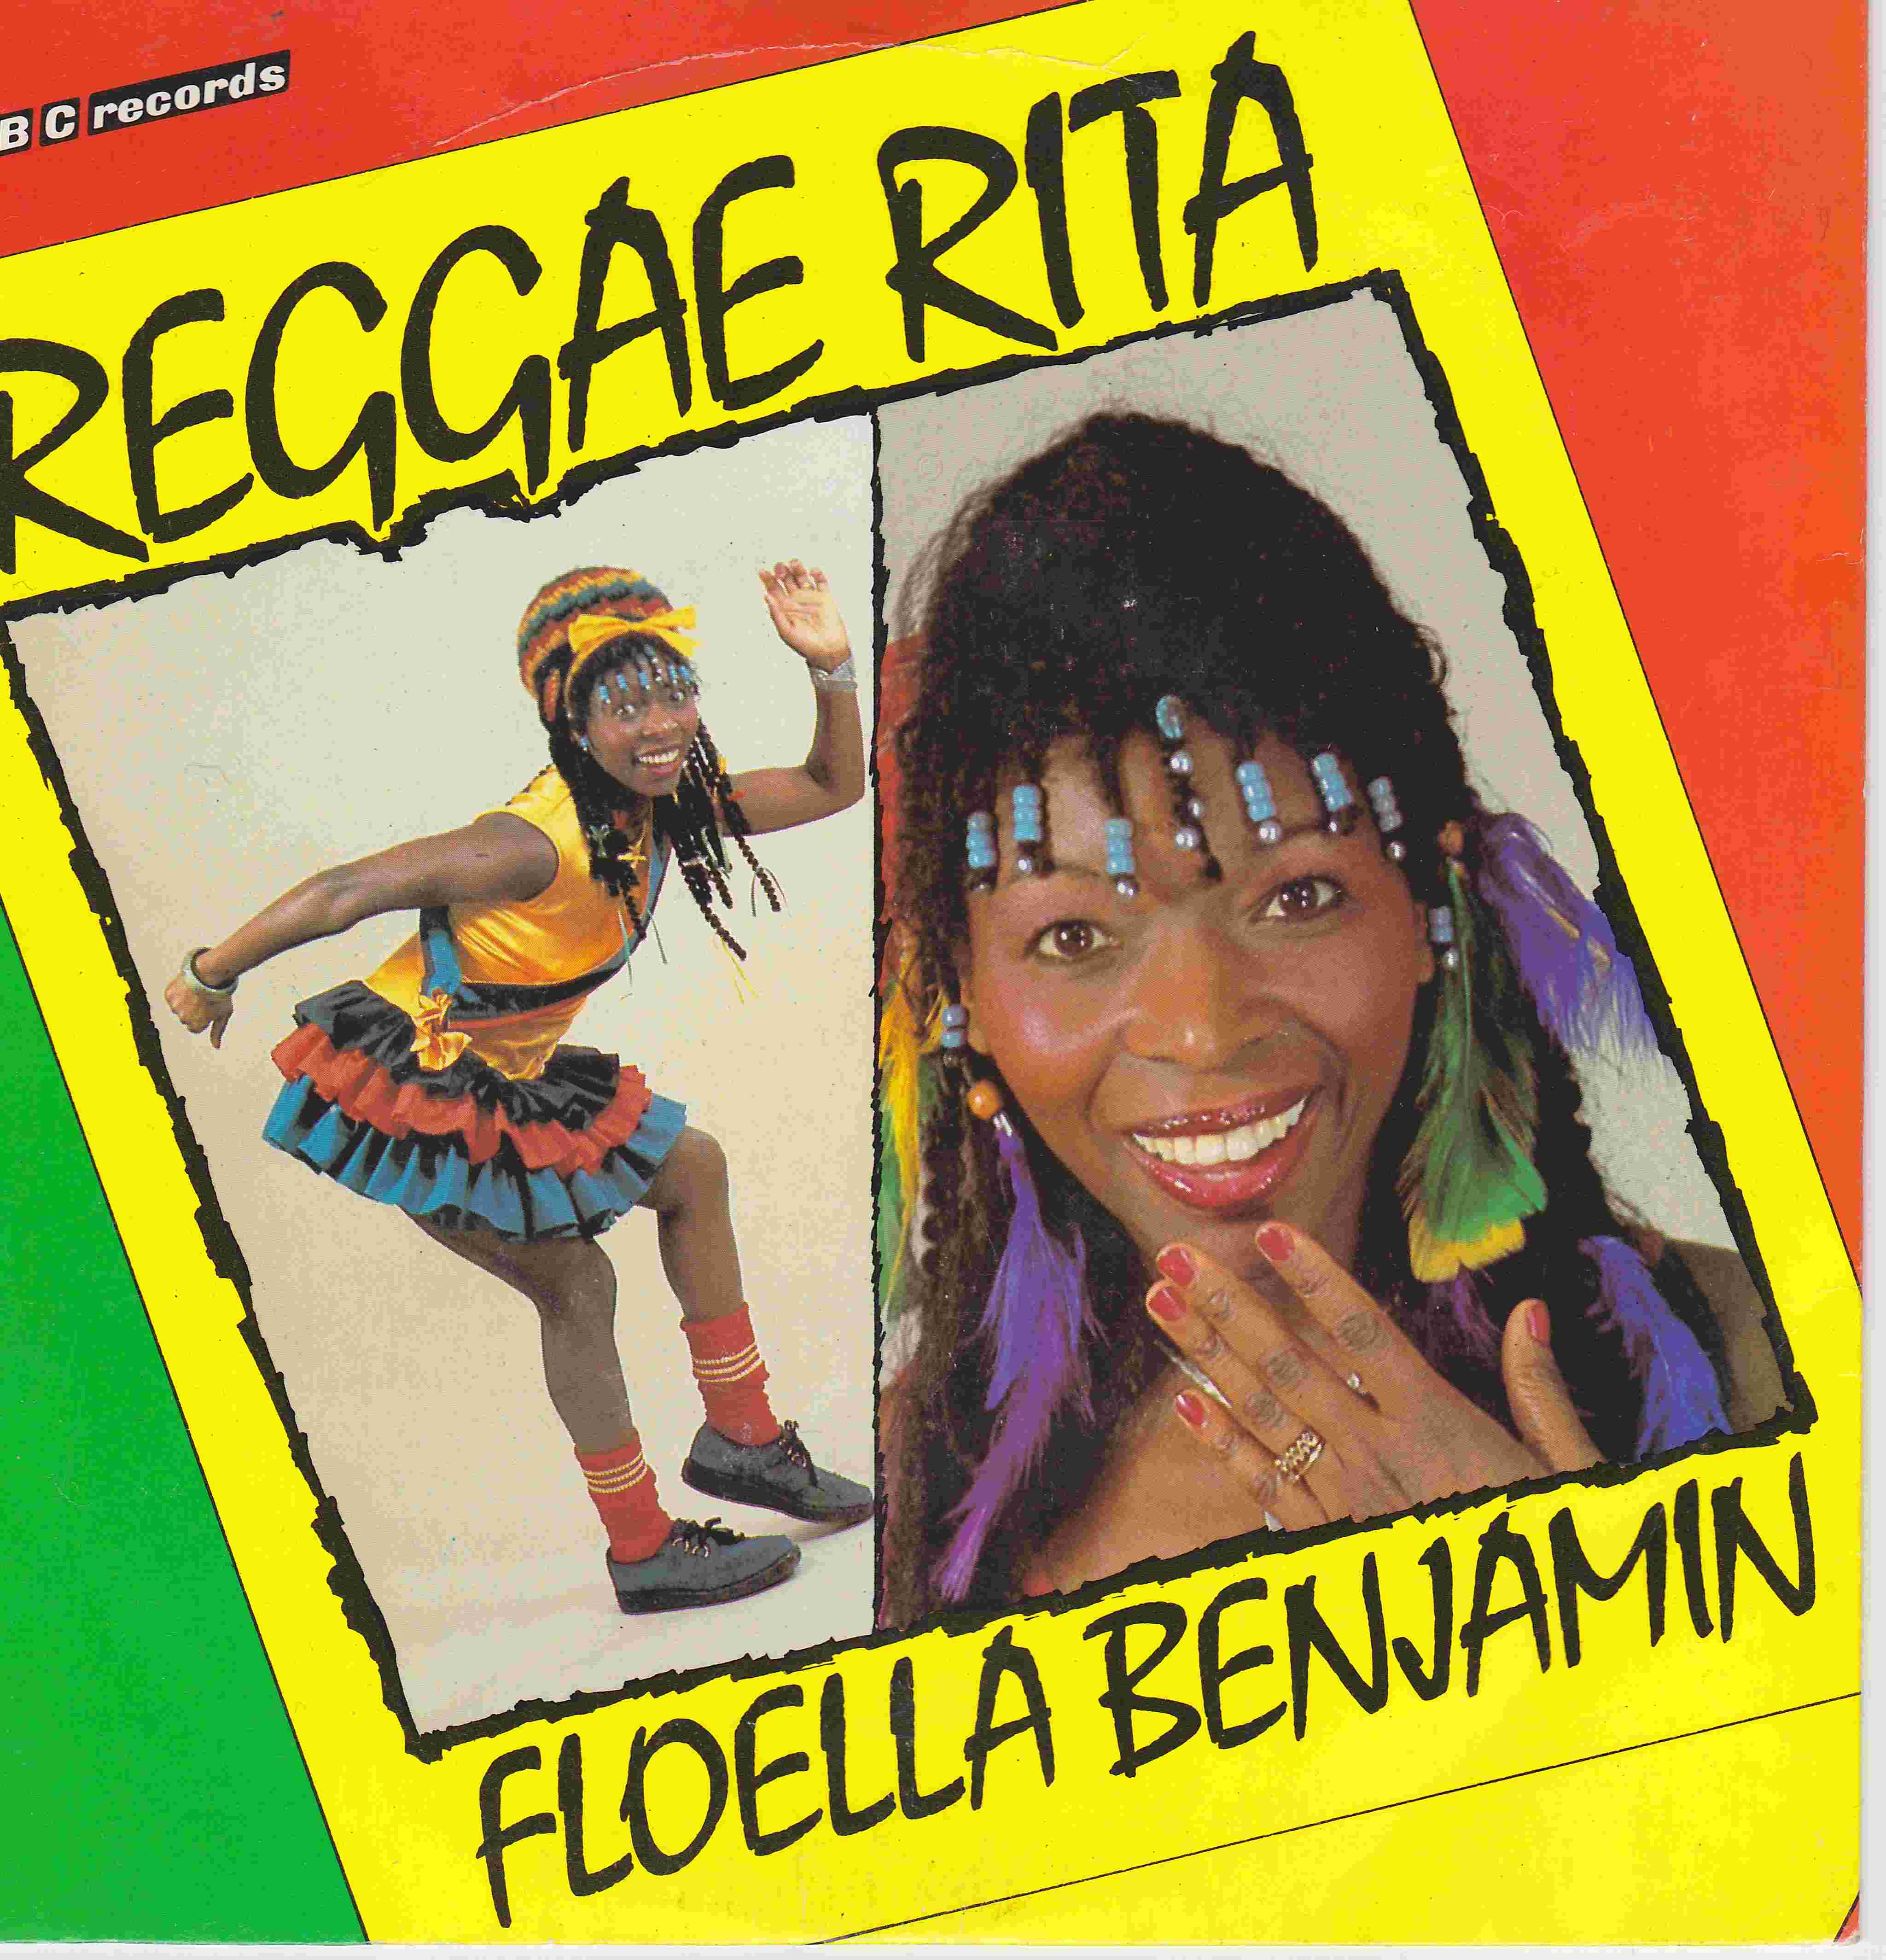 Picture of RESL 142 Reggae Rita by artist Floella Benjamin / Dr. Dread Gosling from the BBC singles - Records and Tapes library